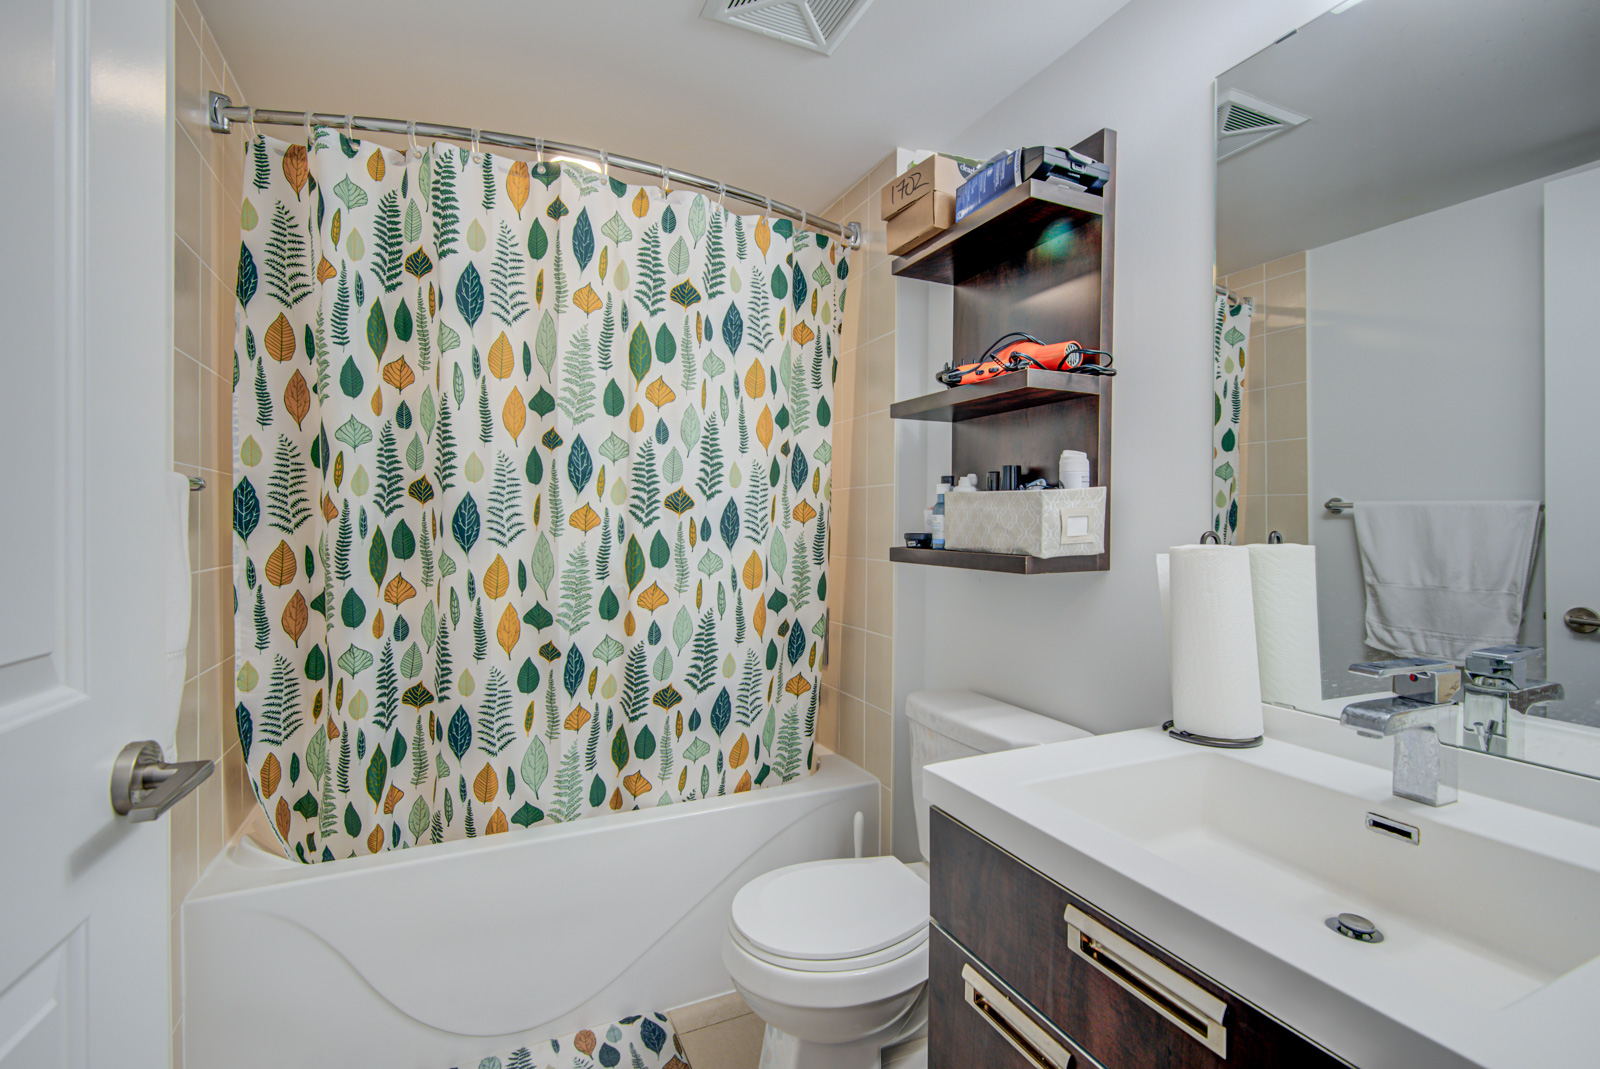 Bathroom with floral shower curtain, white tub and sink, large mirror and shelves with hairdryer and toiletries.